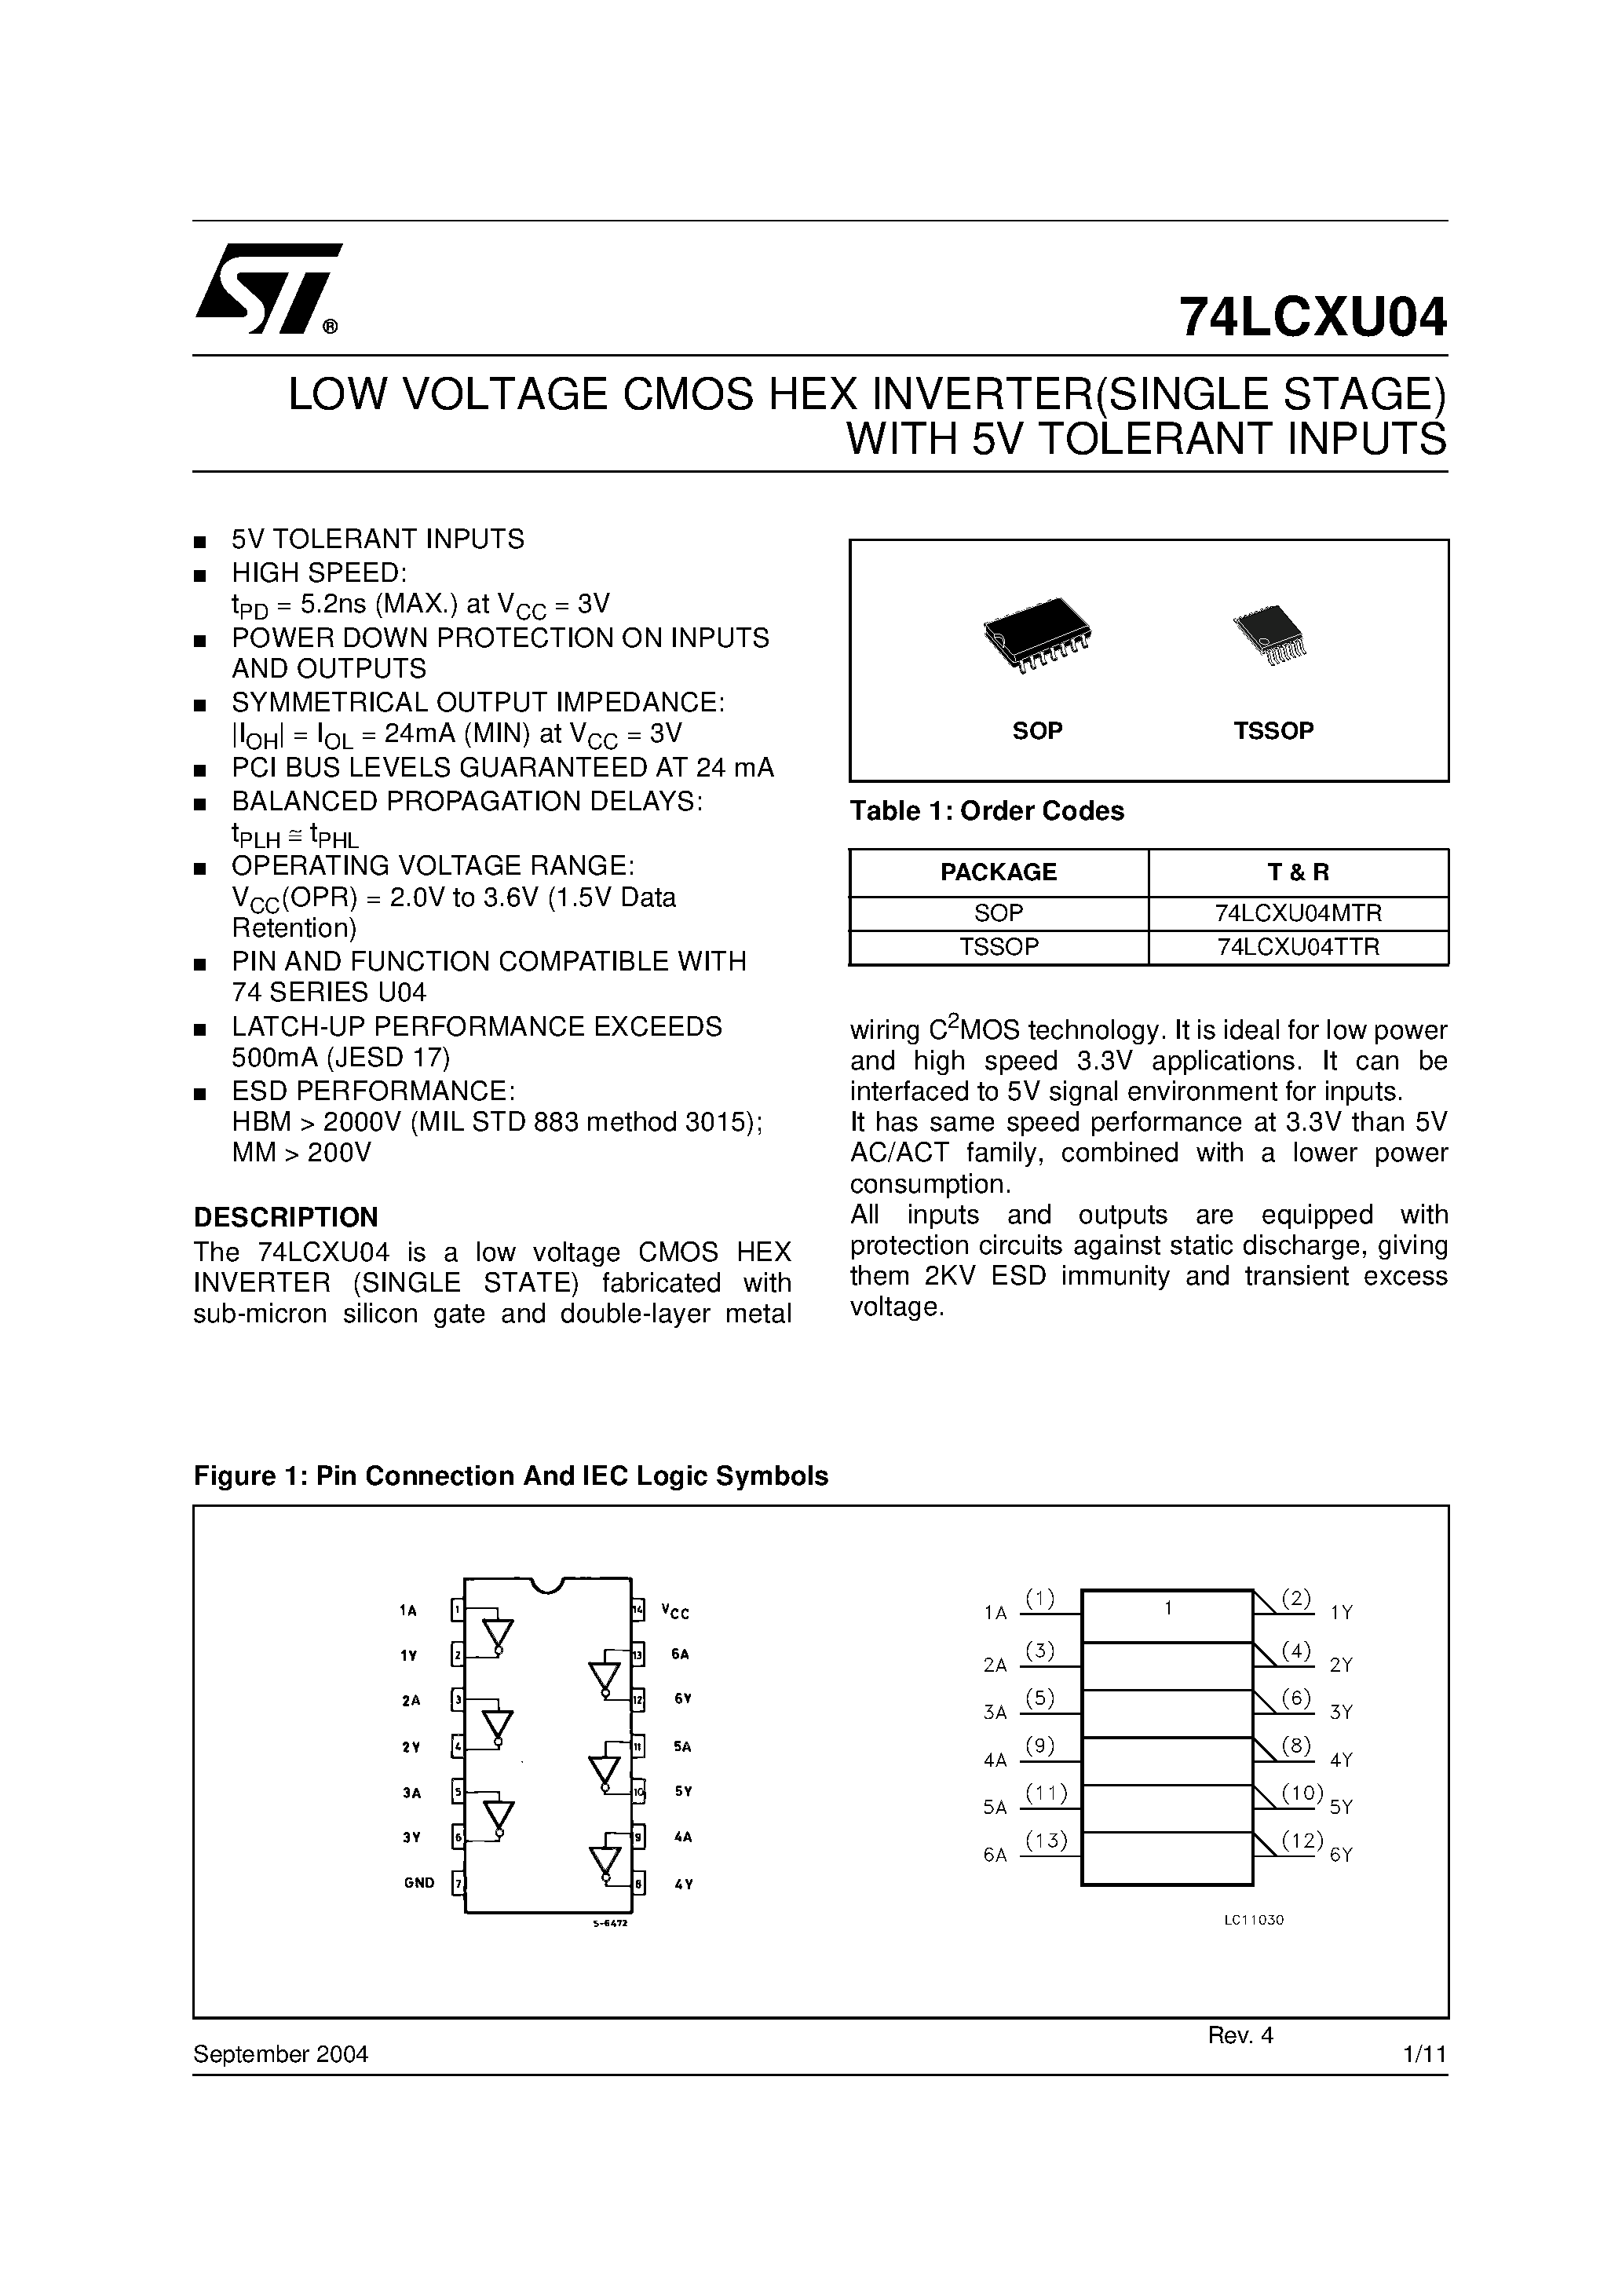 Datasheet 74LCXU04TTR - LOW VOLTAGE CMOS HEX INVERTER(SINGLE STAGE) WITH 5V TOLERANT INPUTS page 1